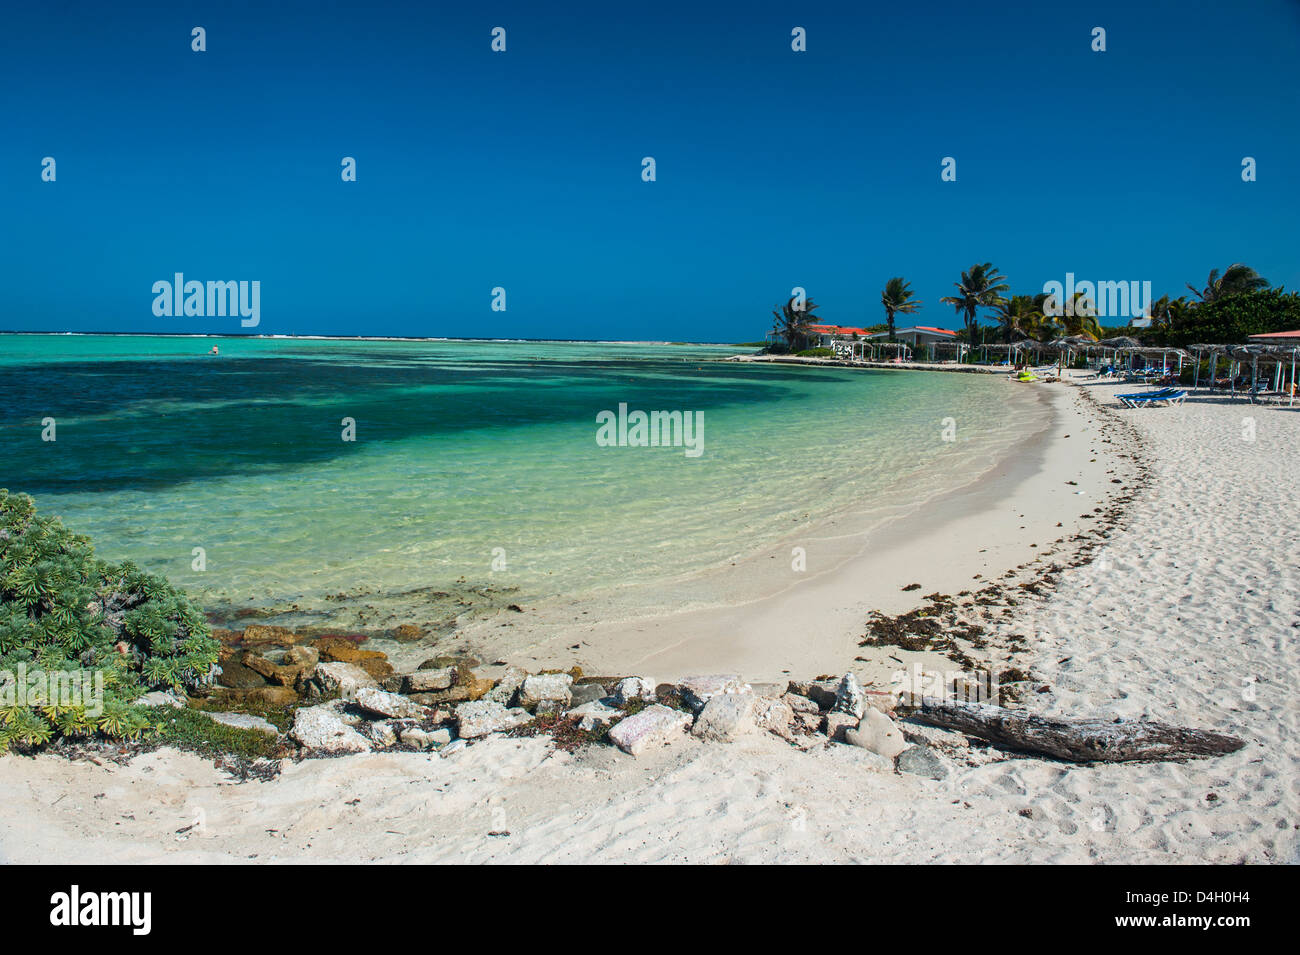 Turquoise water Lac Bay, Bonaire, ABC Islands, Netherlands Antilles, Caribbean Stock Photo